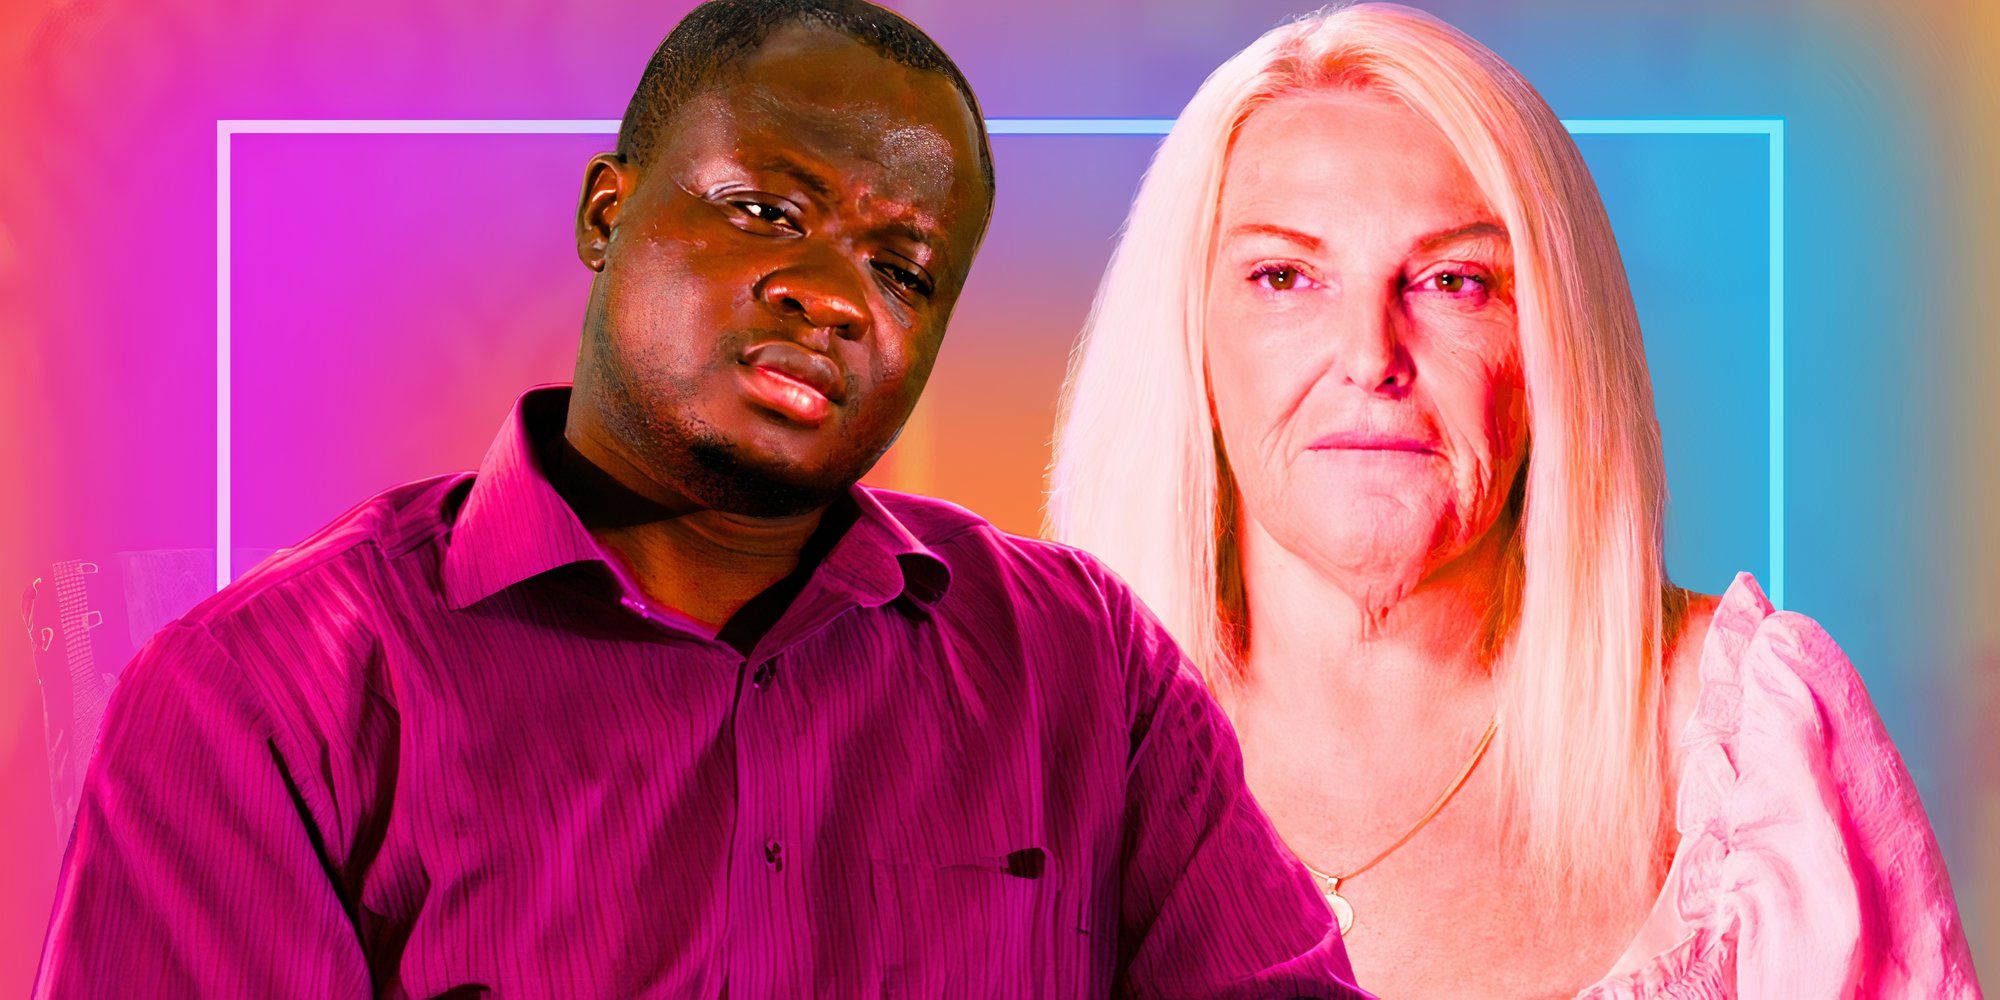 90 Day Fiance's Michael Ilesanmi and Angela Deem look sad in front of a neon purple and blue background.